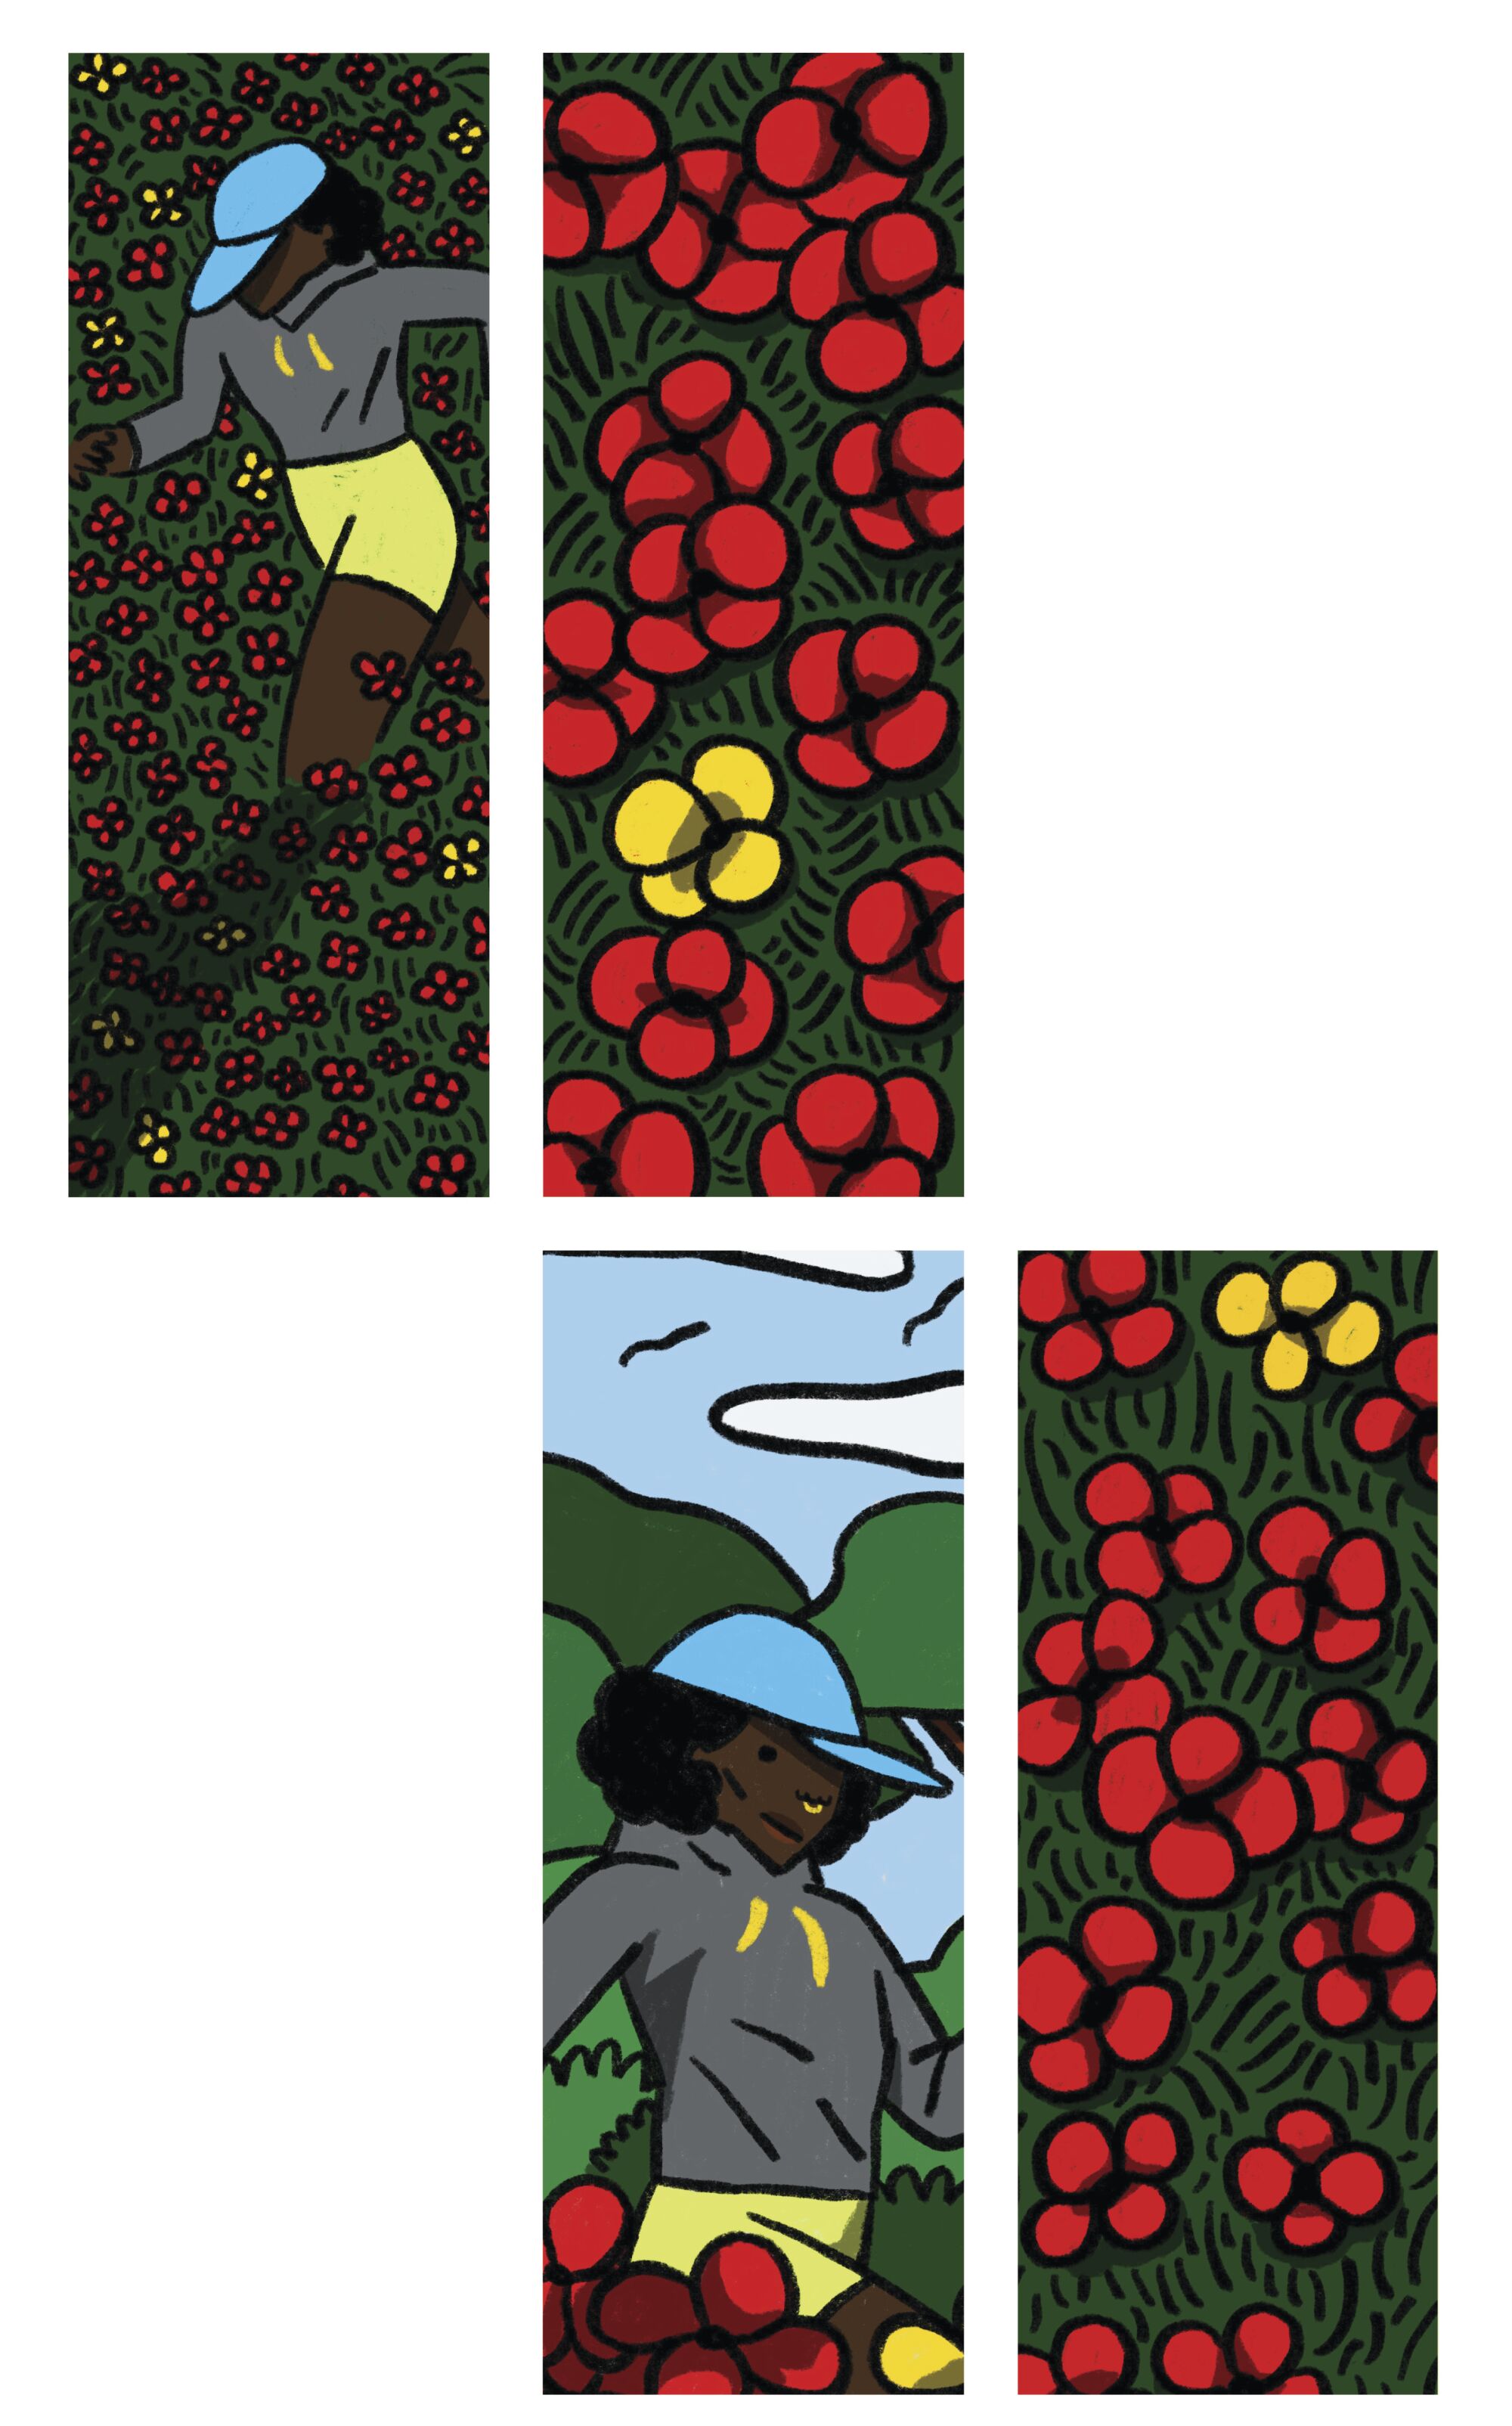 Two illustrations of a person walking outdoors and two of red flowers.